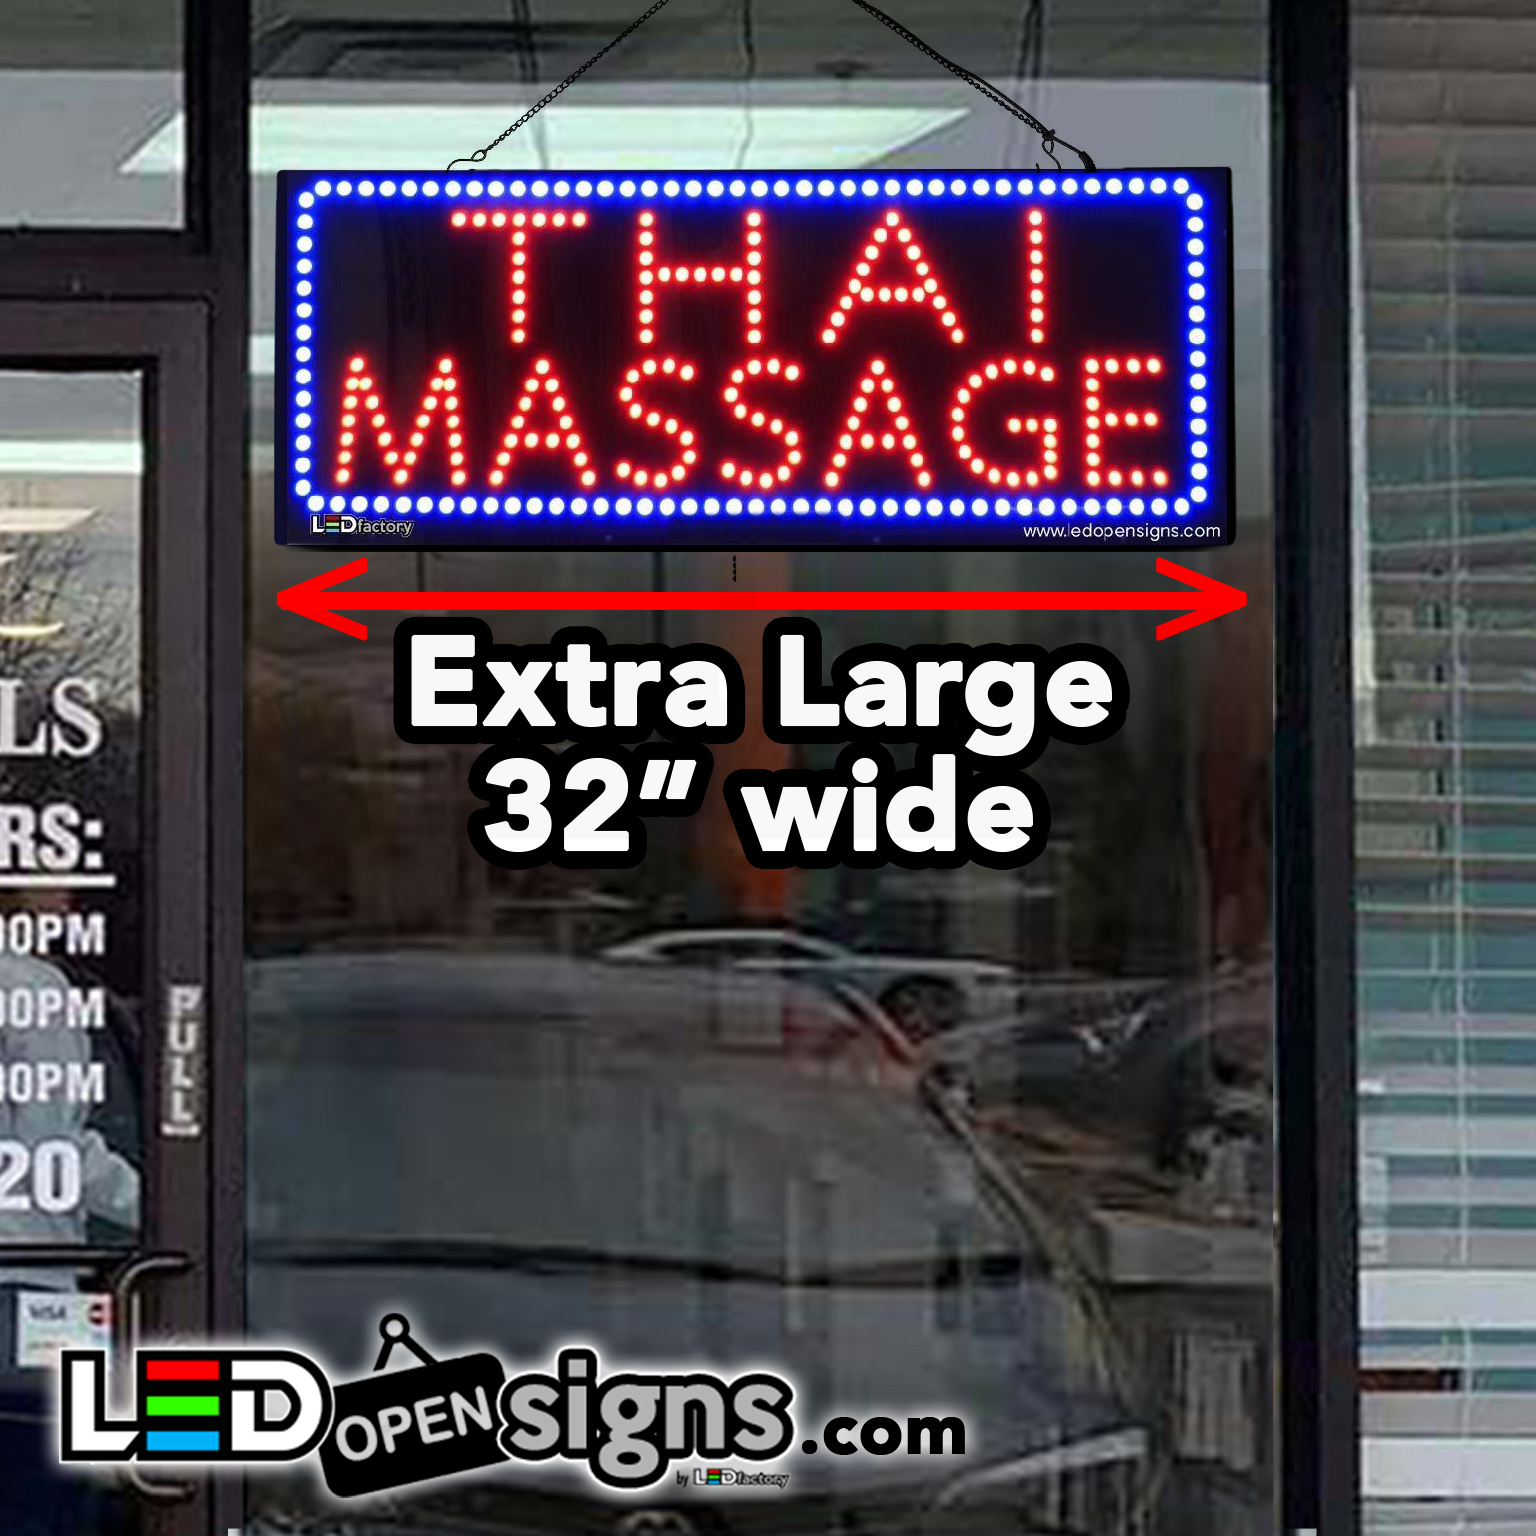 LED Thai Massage Sign for Business 31 x 17 Super Bright LED Open Sign for Thai Massage Therapist Electric Advertising Display Sign for Thai Spa Business Shop Store Decor.